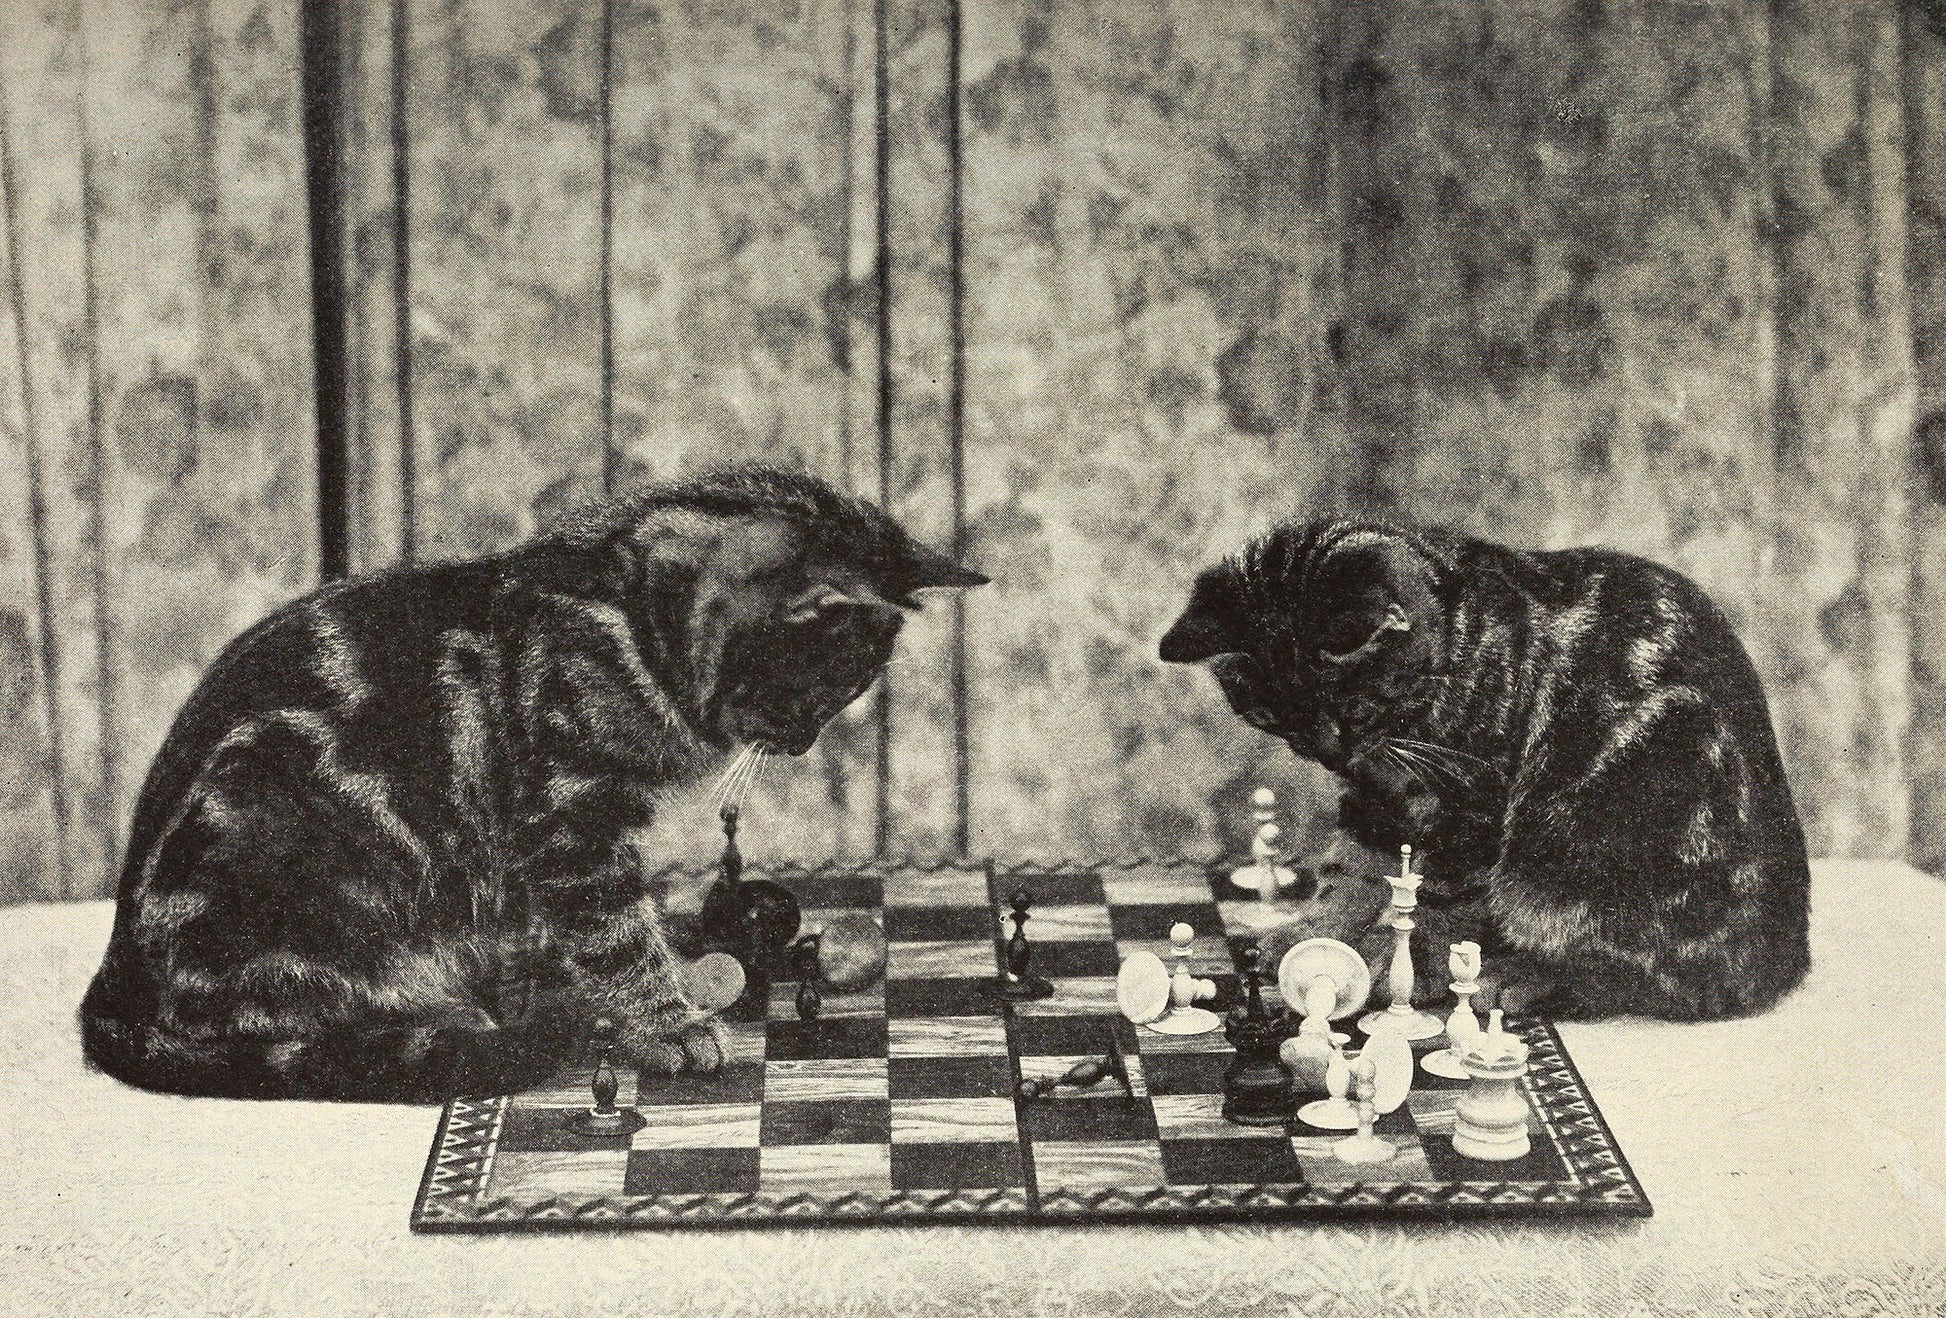 Kittens playing chess photographic artwork (1920s) | Sarah J Eddy Posters, Prints, & Visual Artwork The Trumpet Shop   